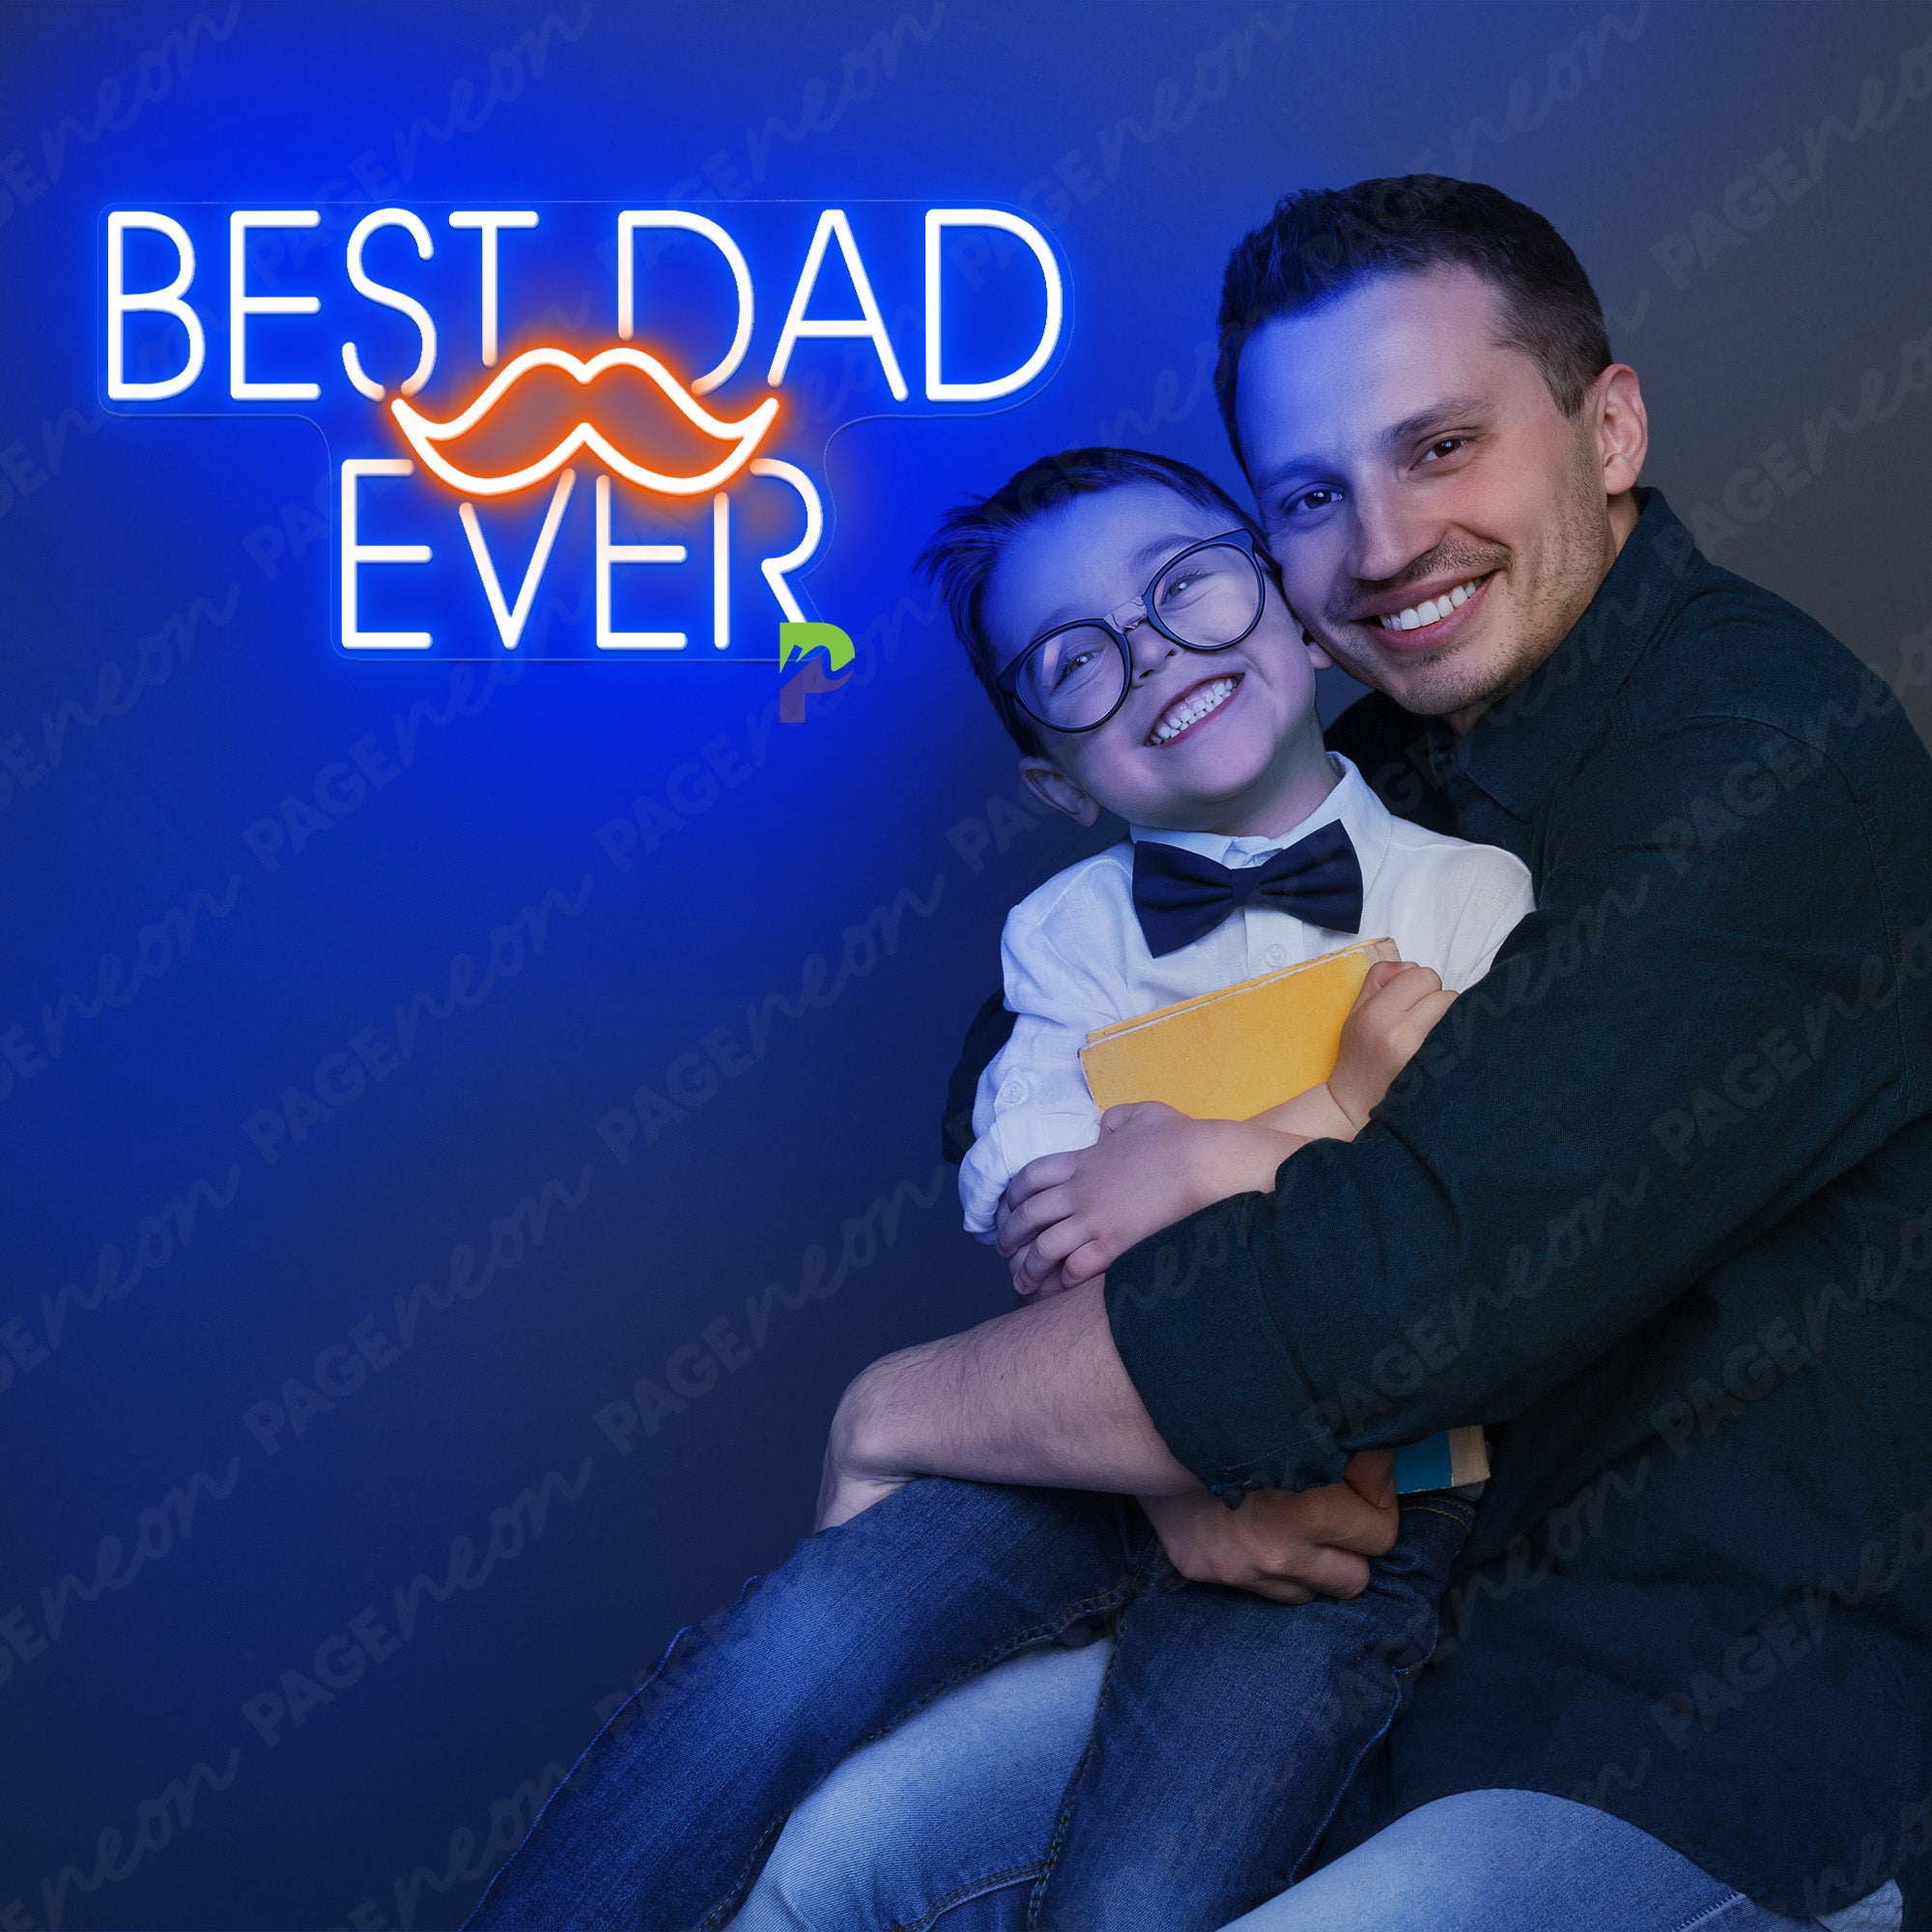 Best Dad Ever Neon Sign Fathers Day Led Light blue